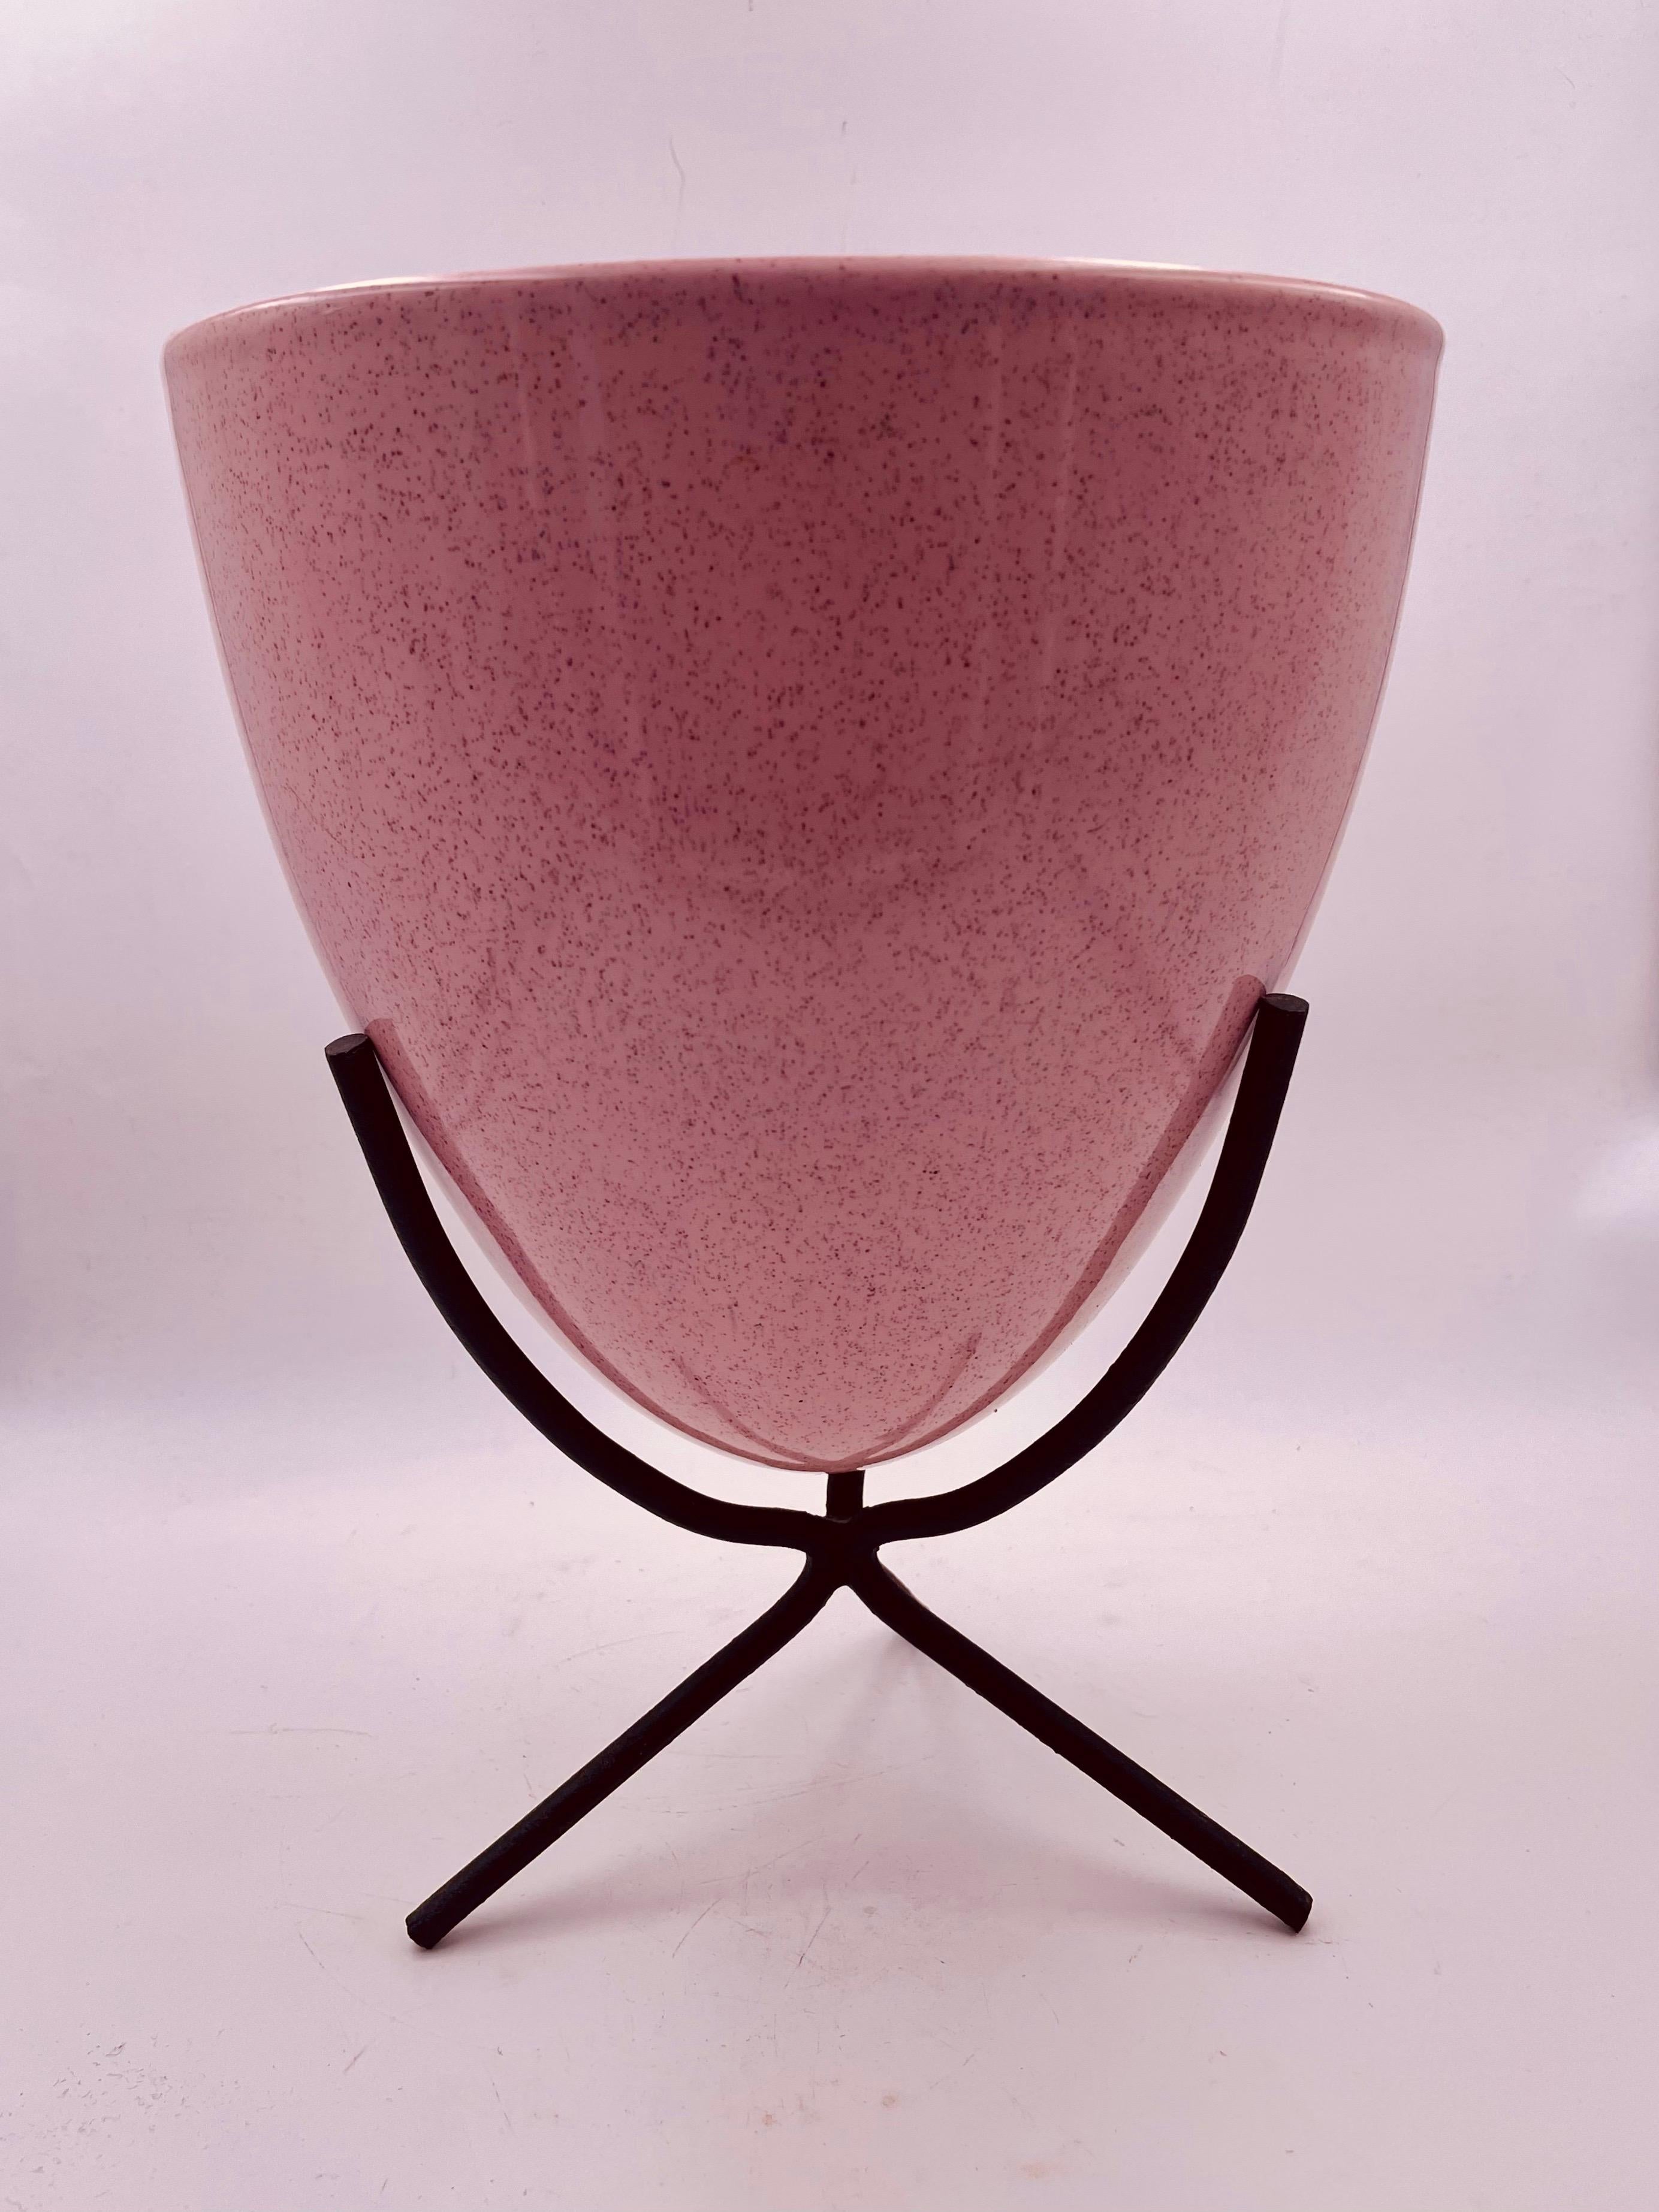 Rare atomic age ceramic planter with iron base and beautiful pink glaze with Spreckels, circa 1950's no chips or cracks only oxidation on the inside from dirt.